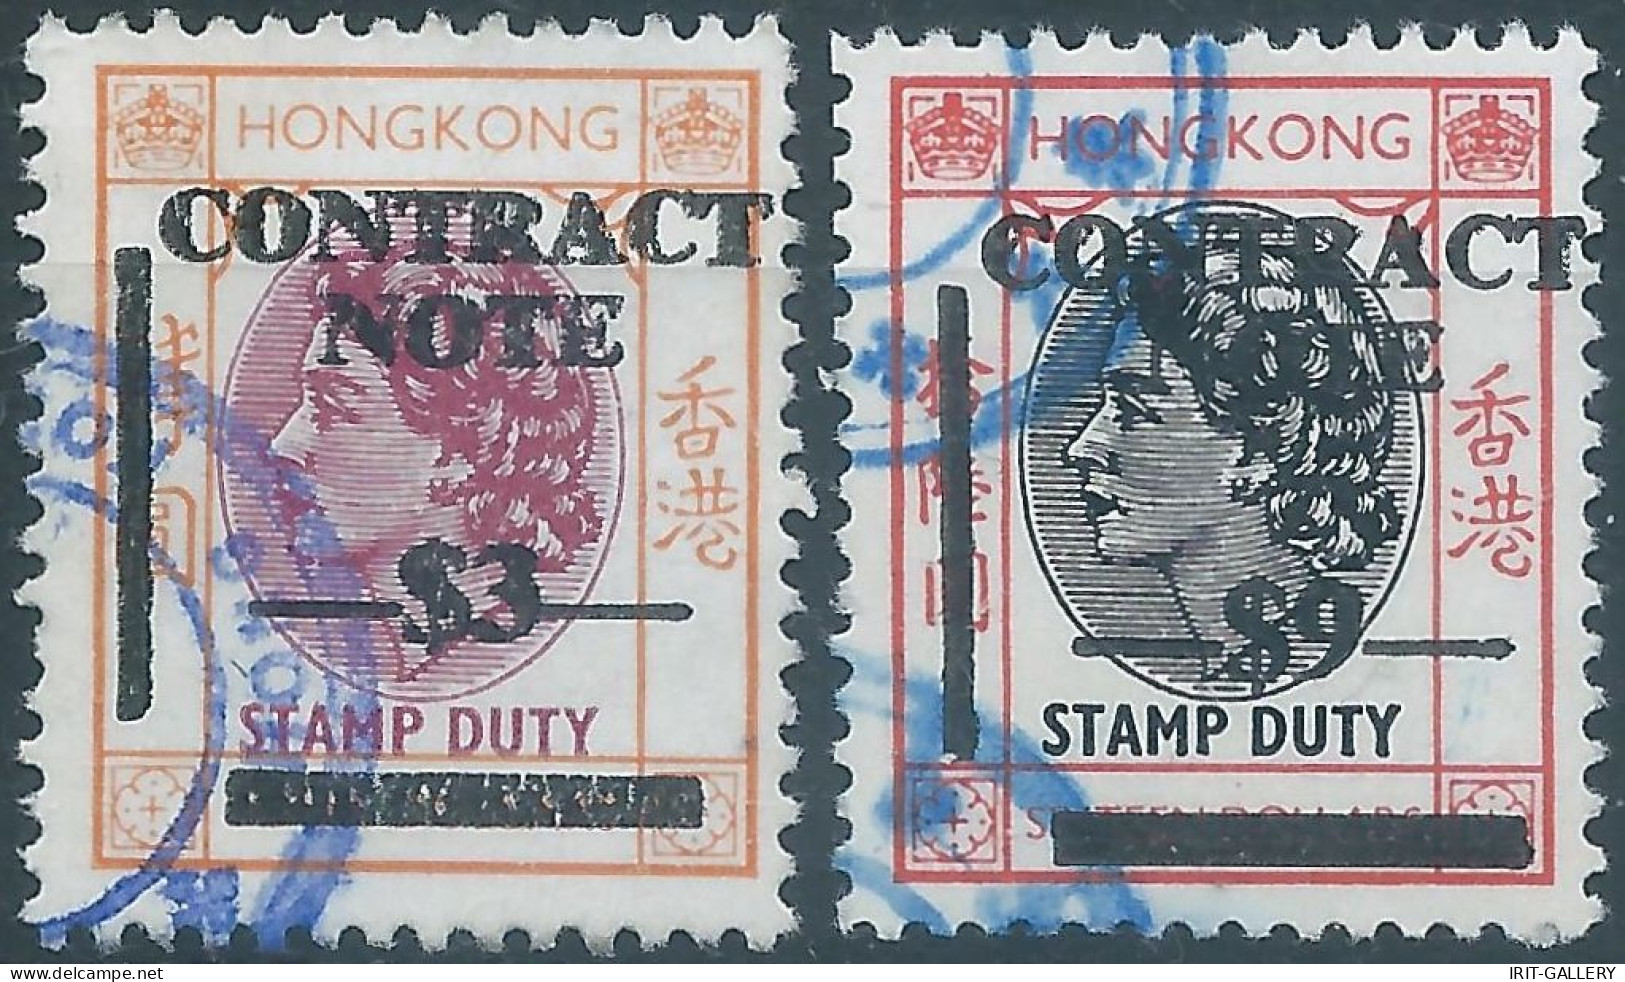 Great Britain-ENGLAND,HONG KONG Revenue Tax Fiscal  Stamp DUTY Contract Note, $3 & $9 , Obliterated - Stempelmarke Als Postmarke Verwendet